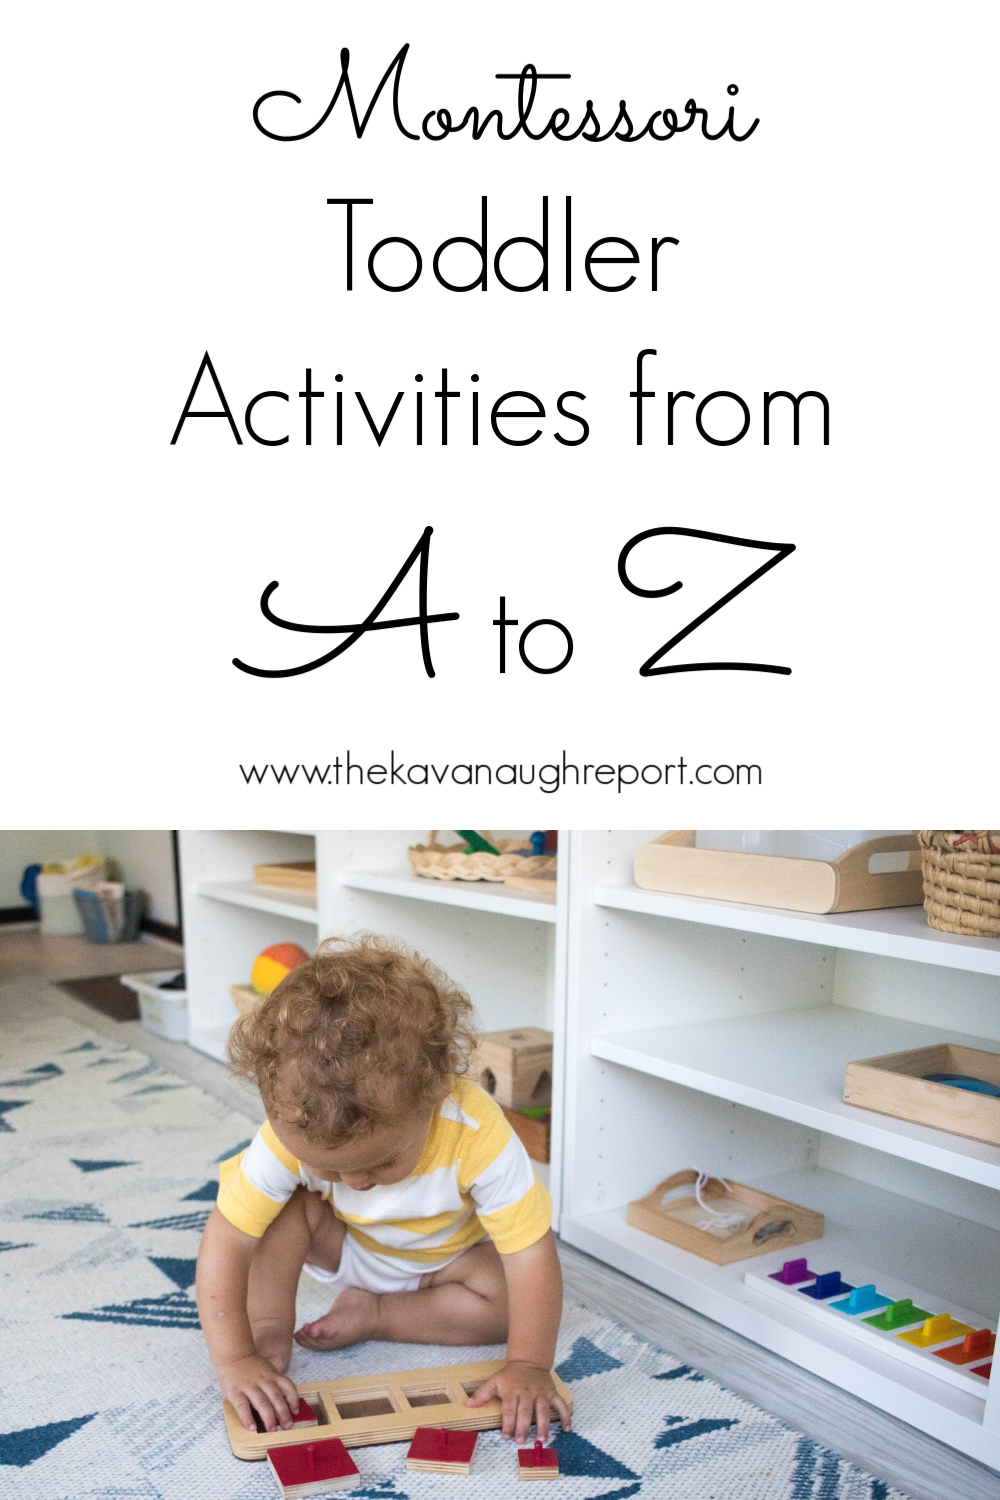 Montessori friendly activities for toddlers A to Z!